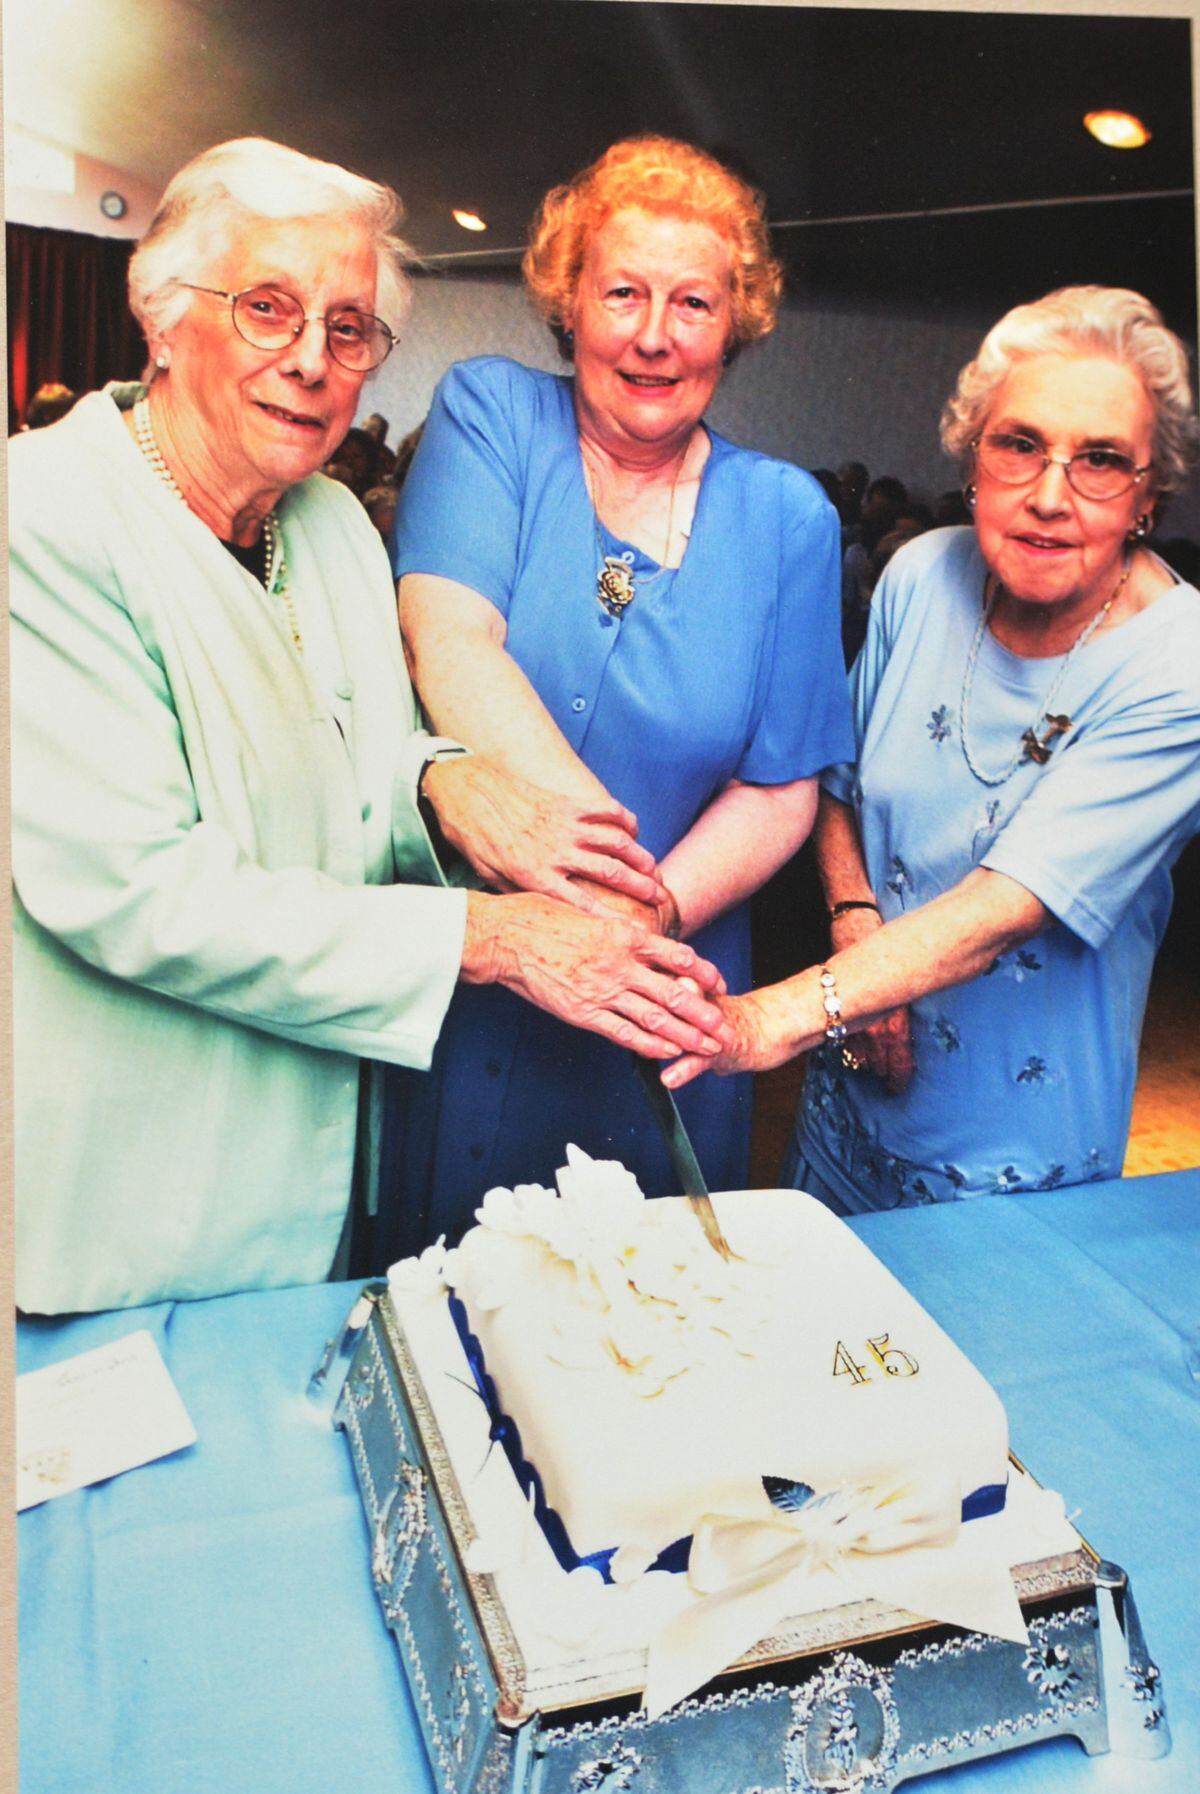 Jean Rudge (founder), Julia Hall (chairman), and Jean Hipwood (president) cut a cake on the 45th Sapphire anniversary of the club in 2000